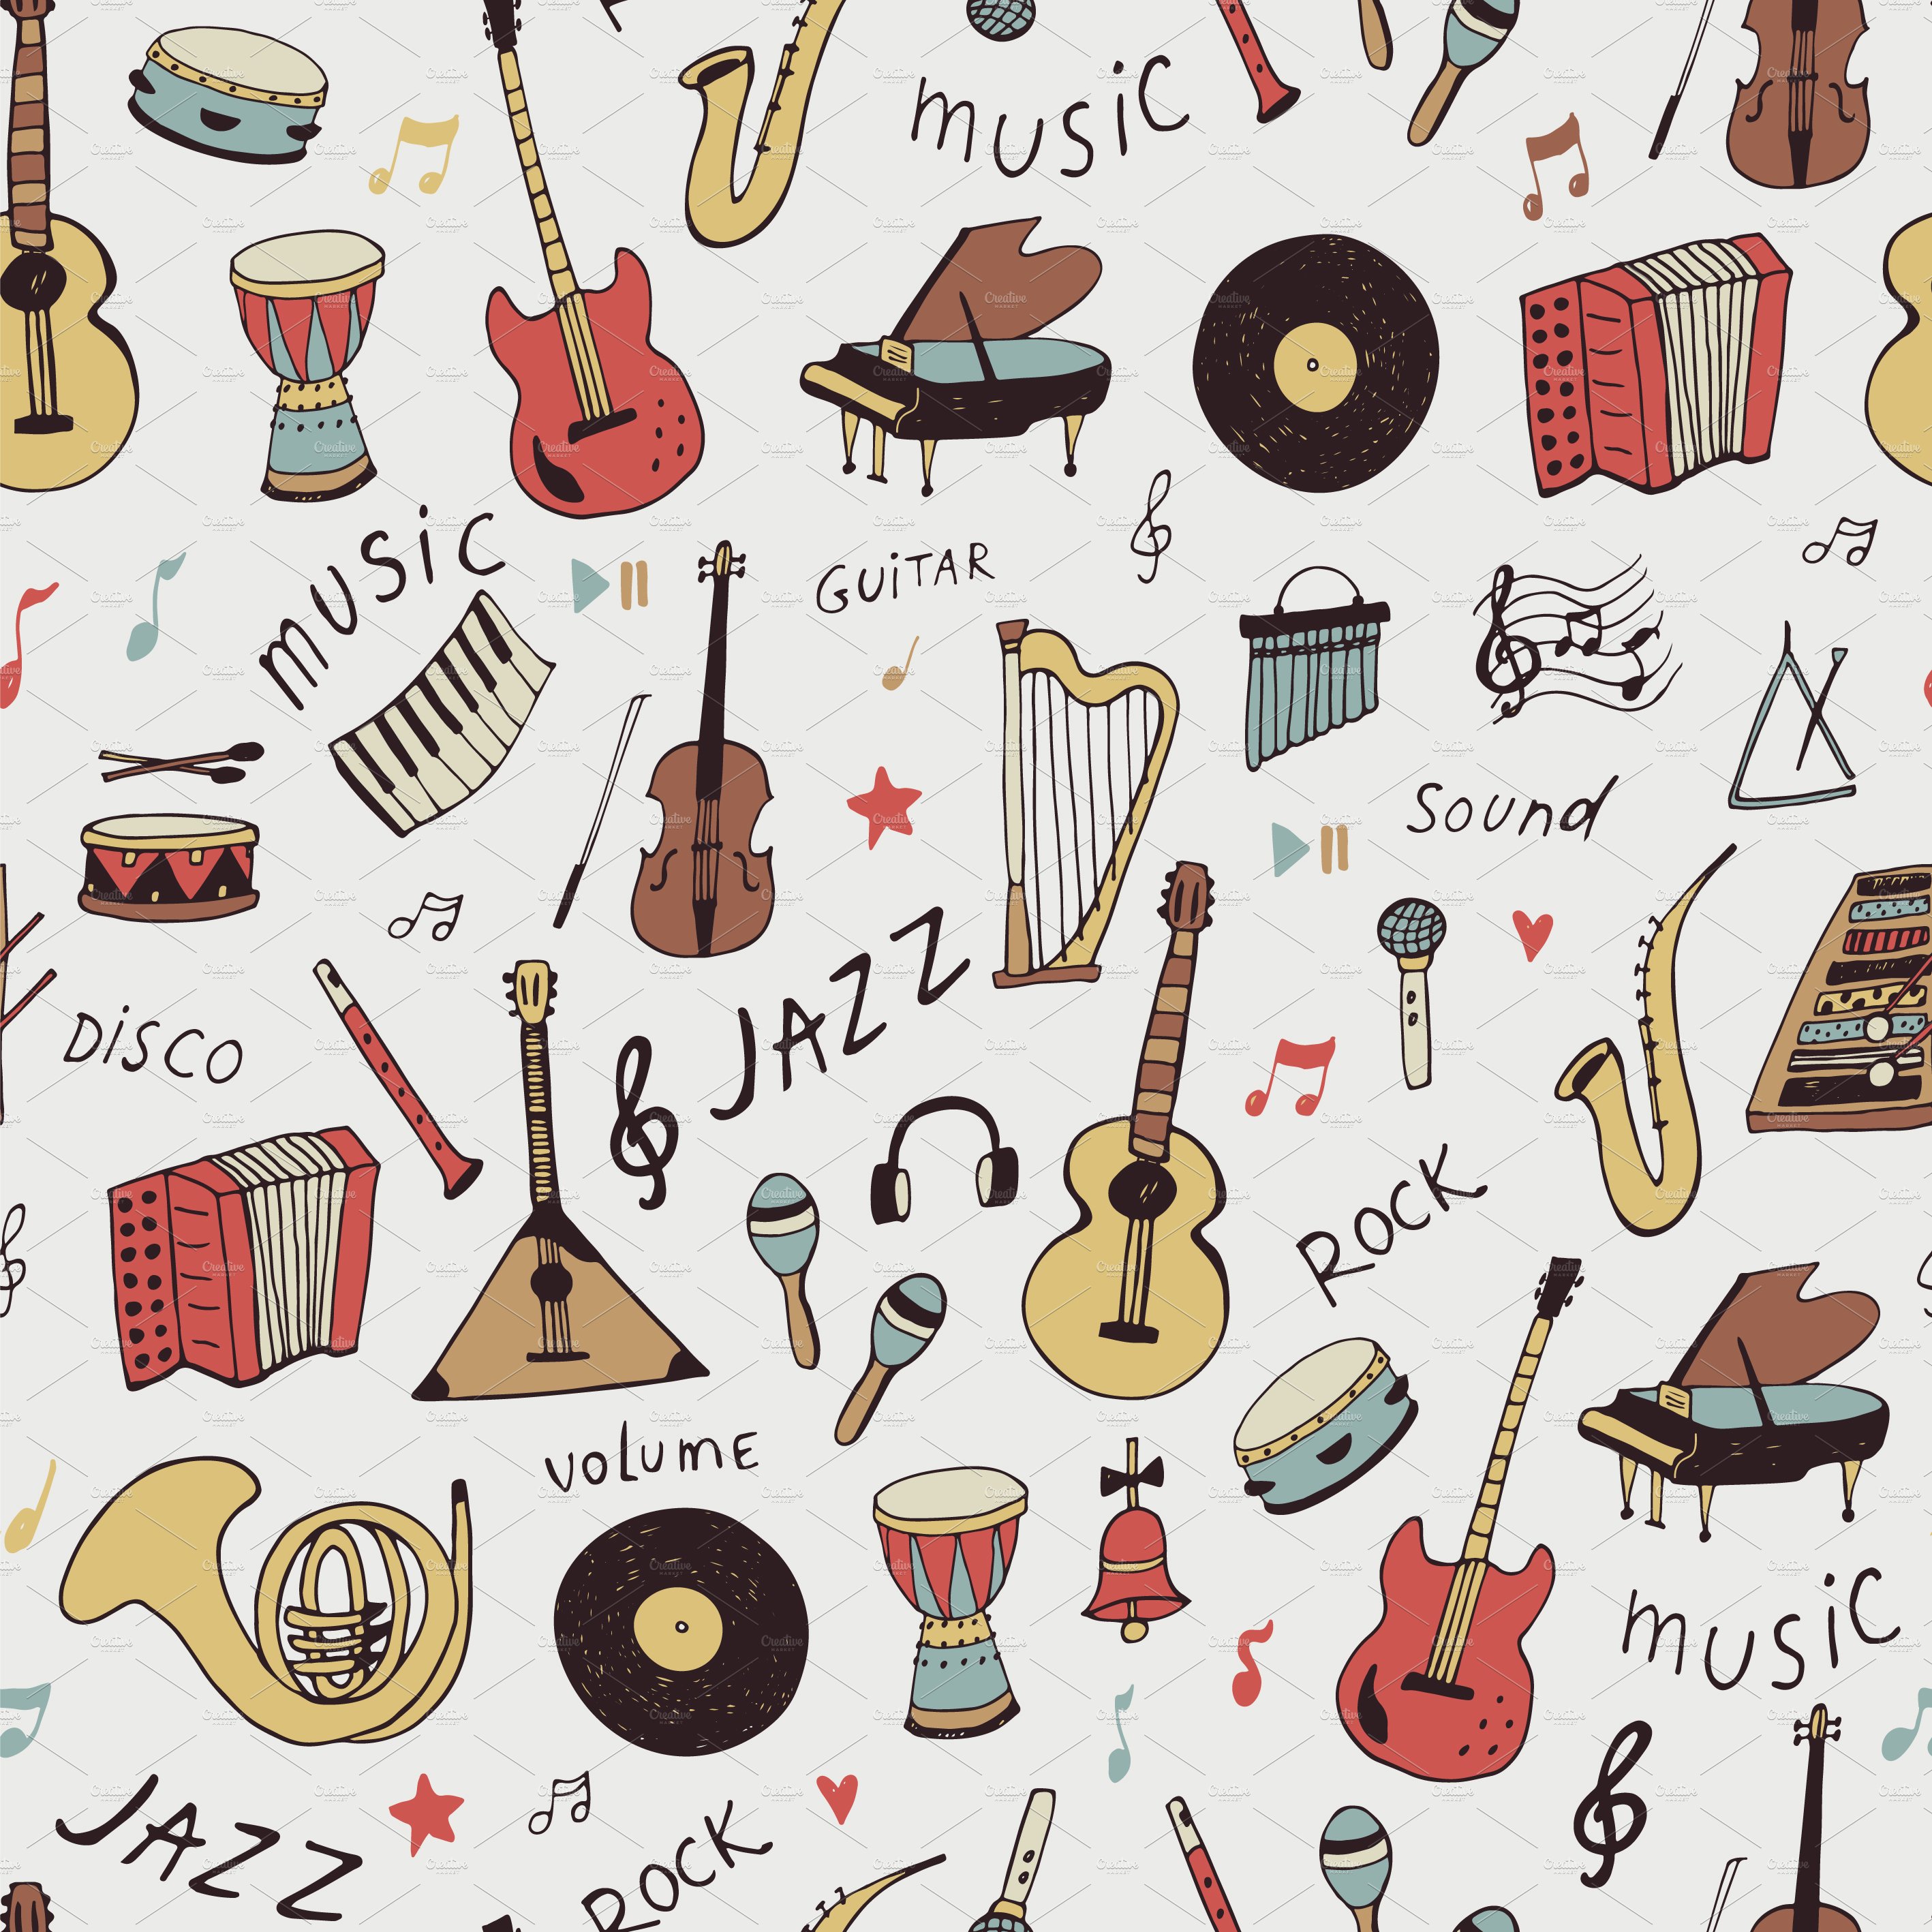 So colorful musical instruments in different styles.